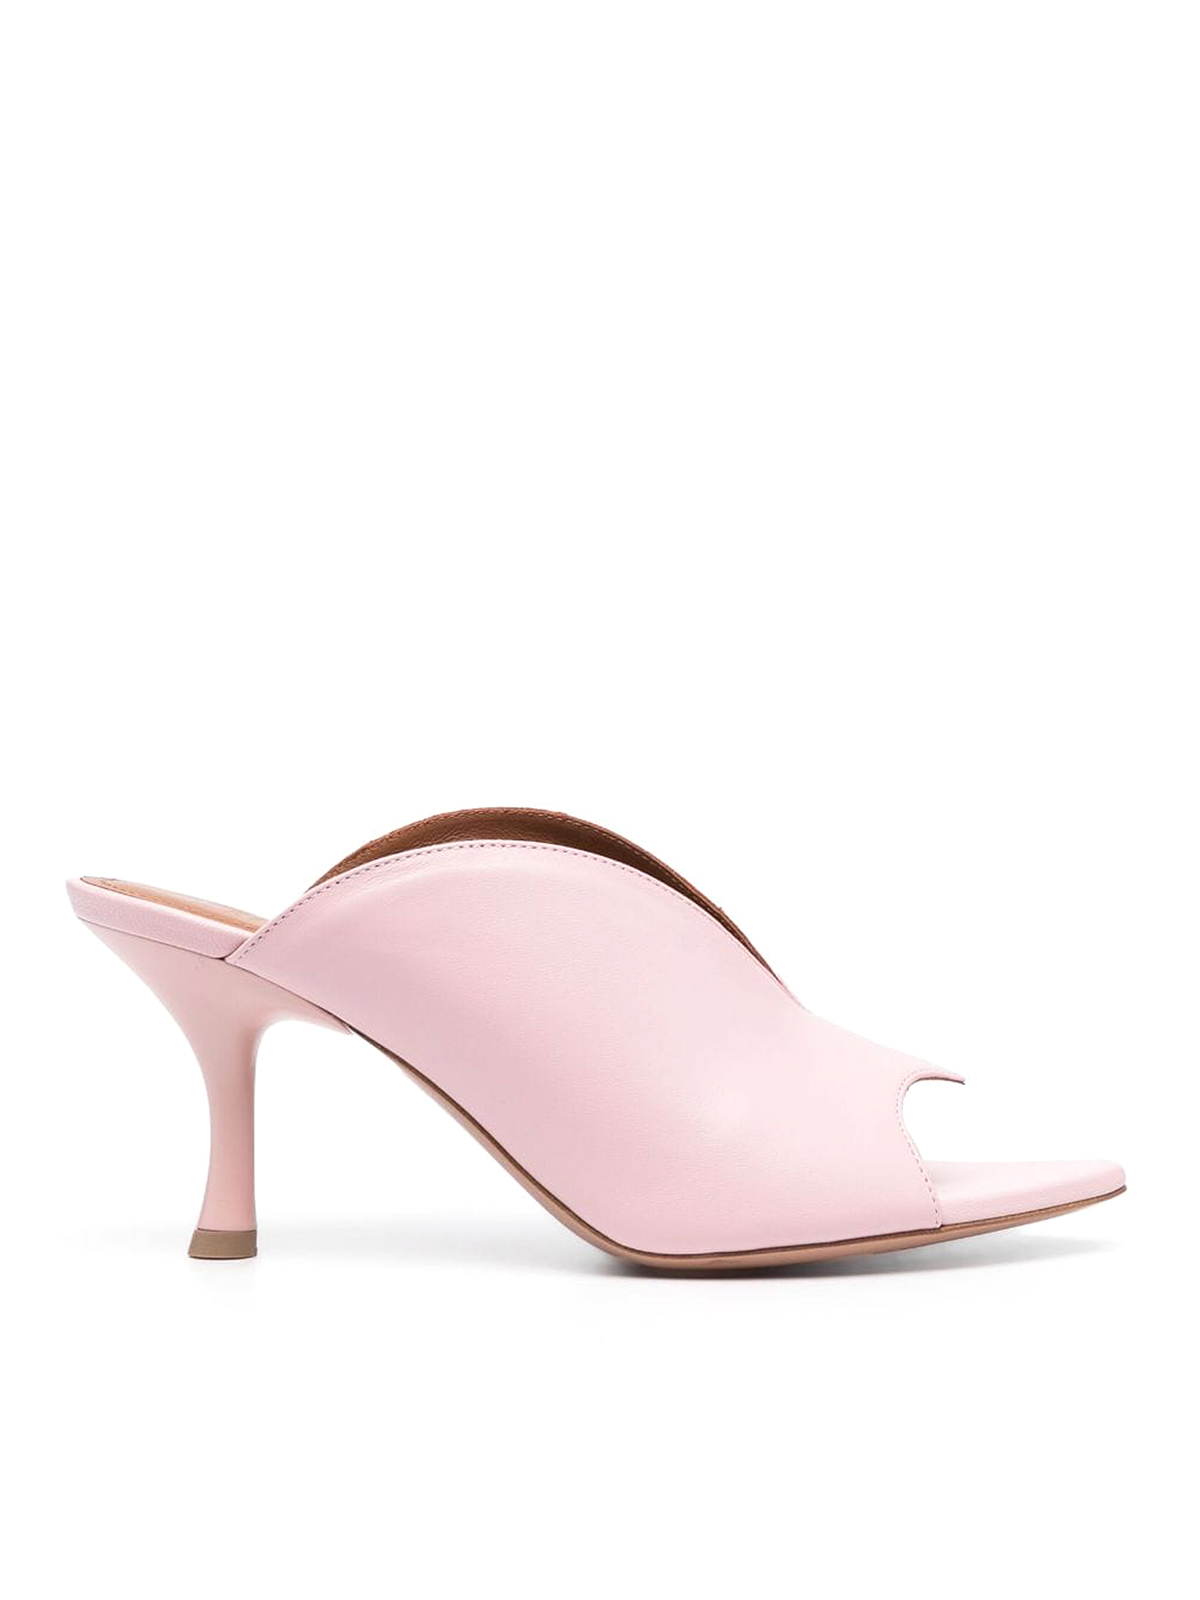 Malone Souliers Henri Leather Heel Mules In Color Carne Y Neutral